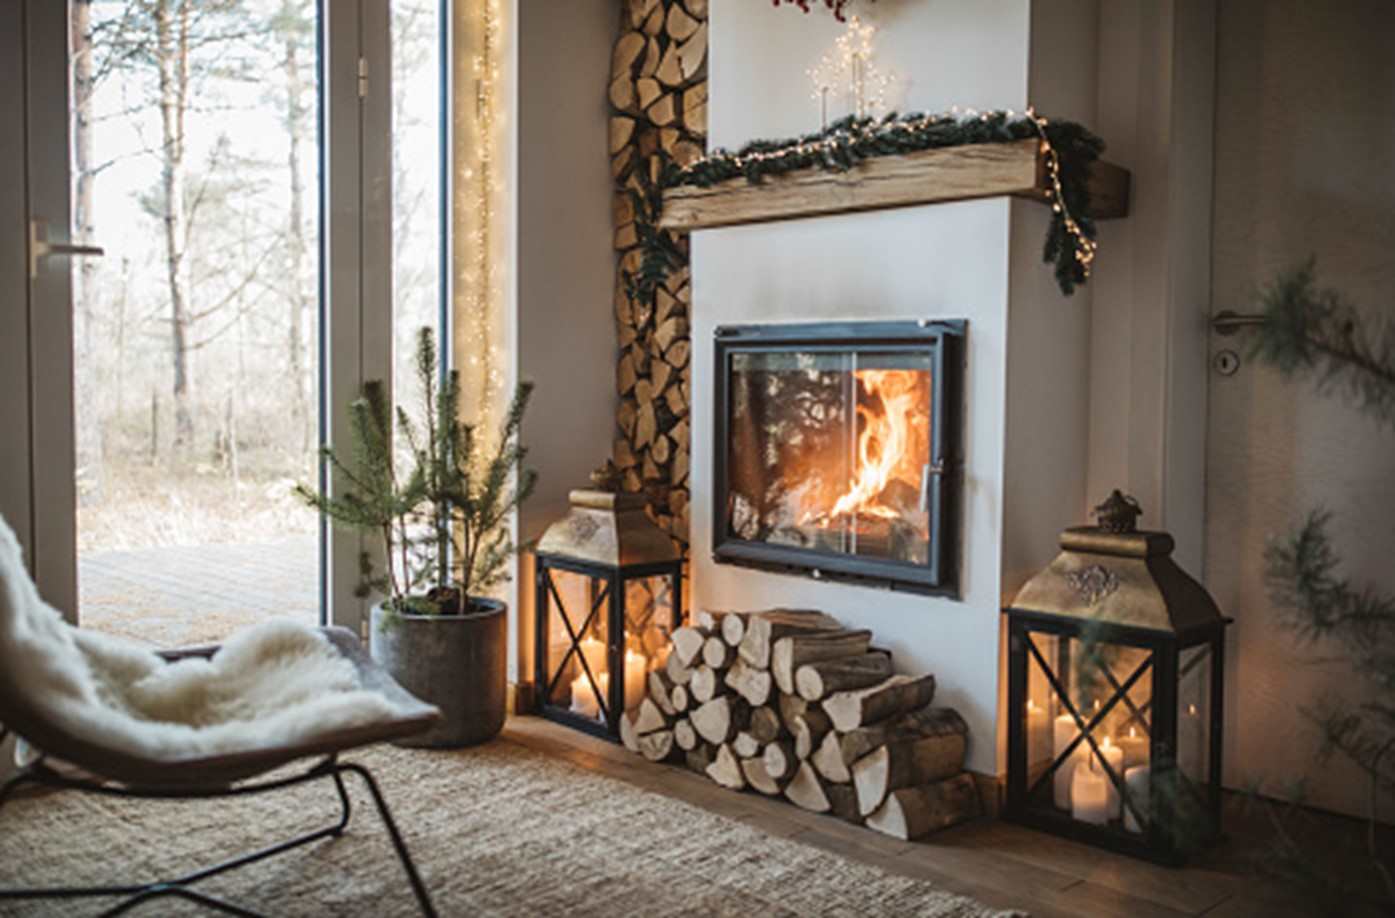 Featured image for “How Fireplace Innovations are Changing Home Design”